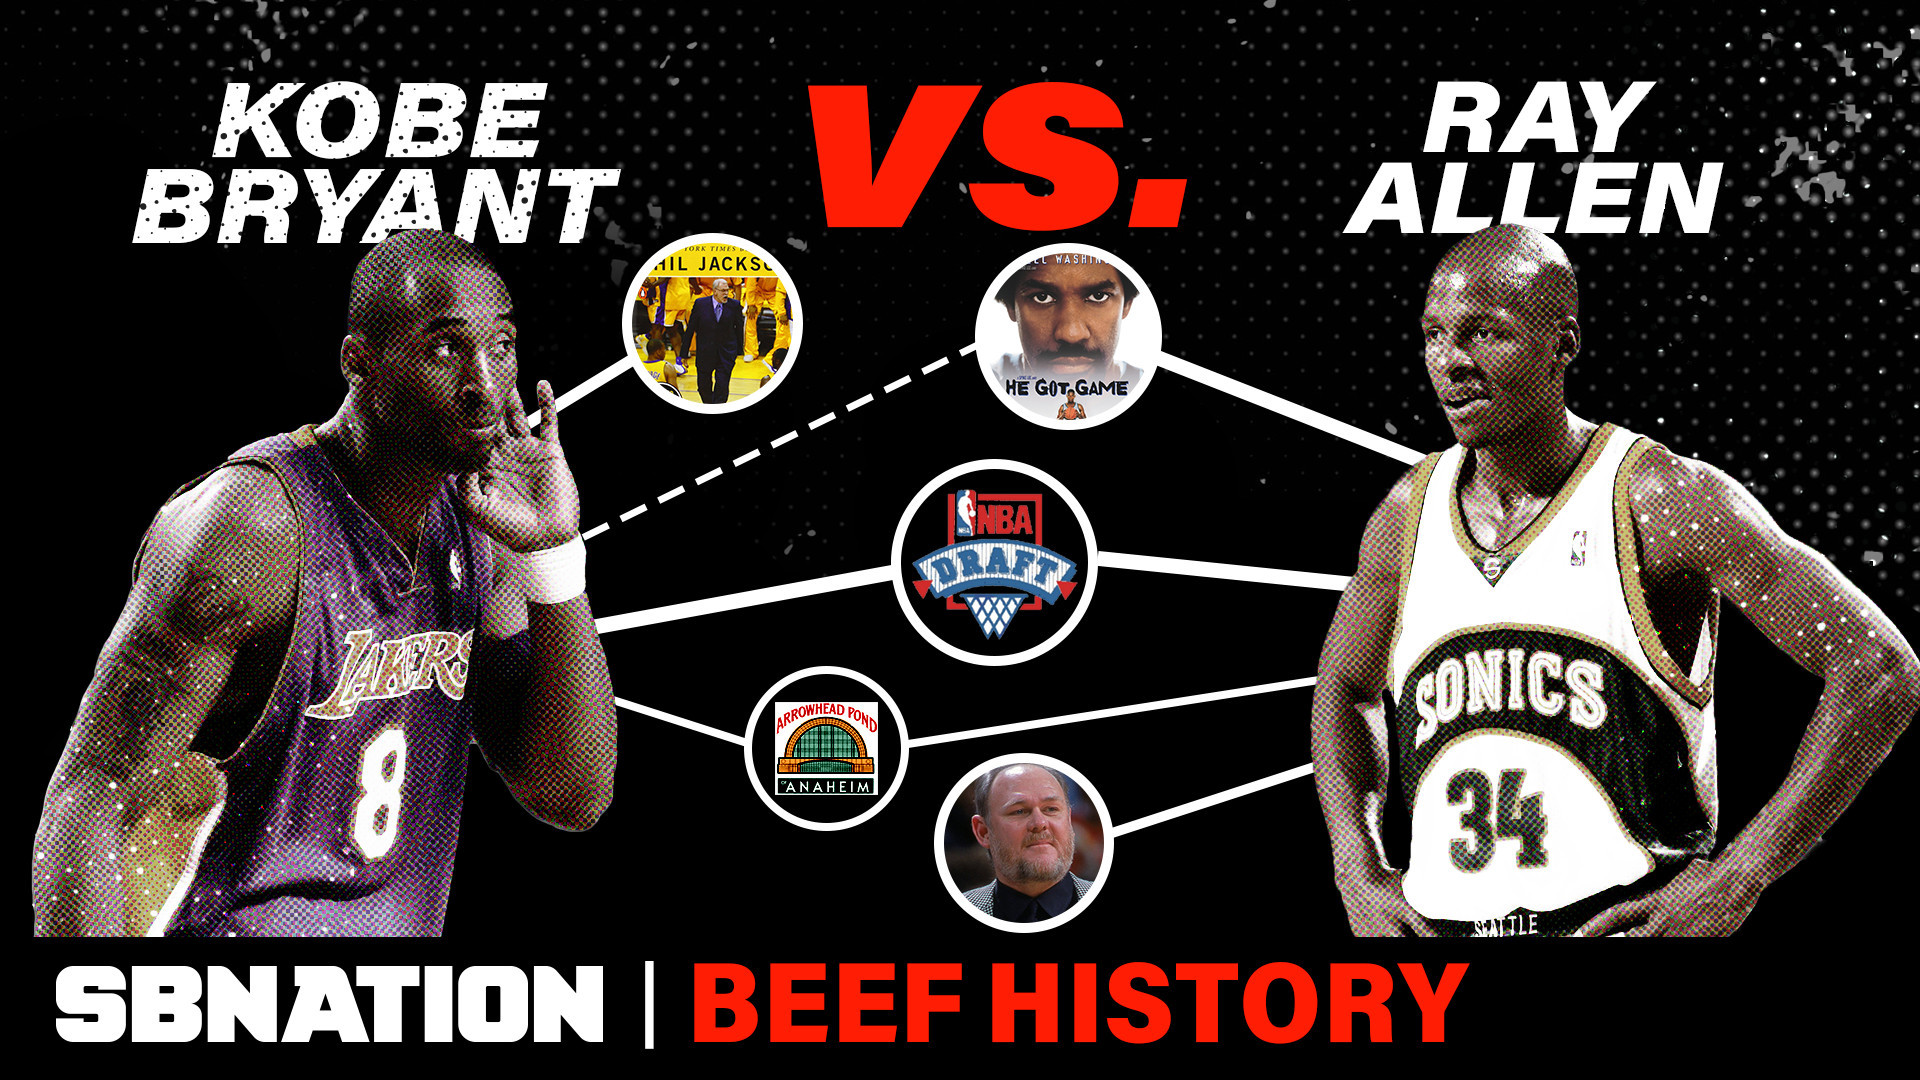 1920x1080 Kobe Bryant's beef with Ray Allen was short, but haunted Kobe for years -  SBNation.com